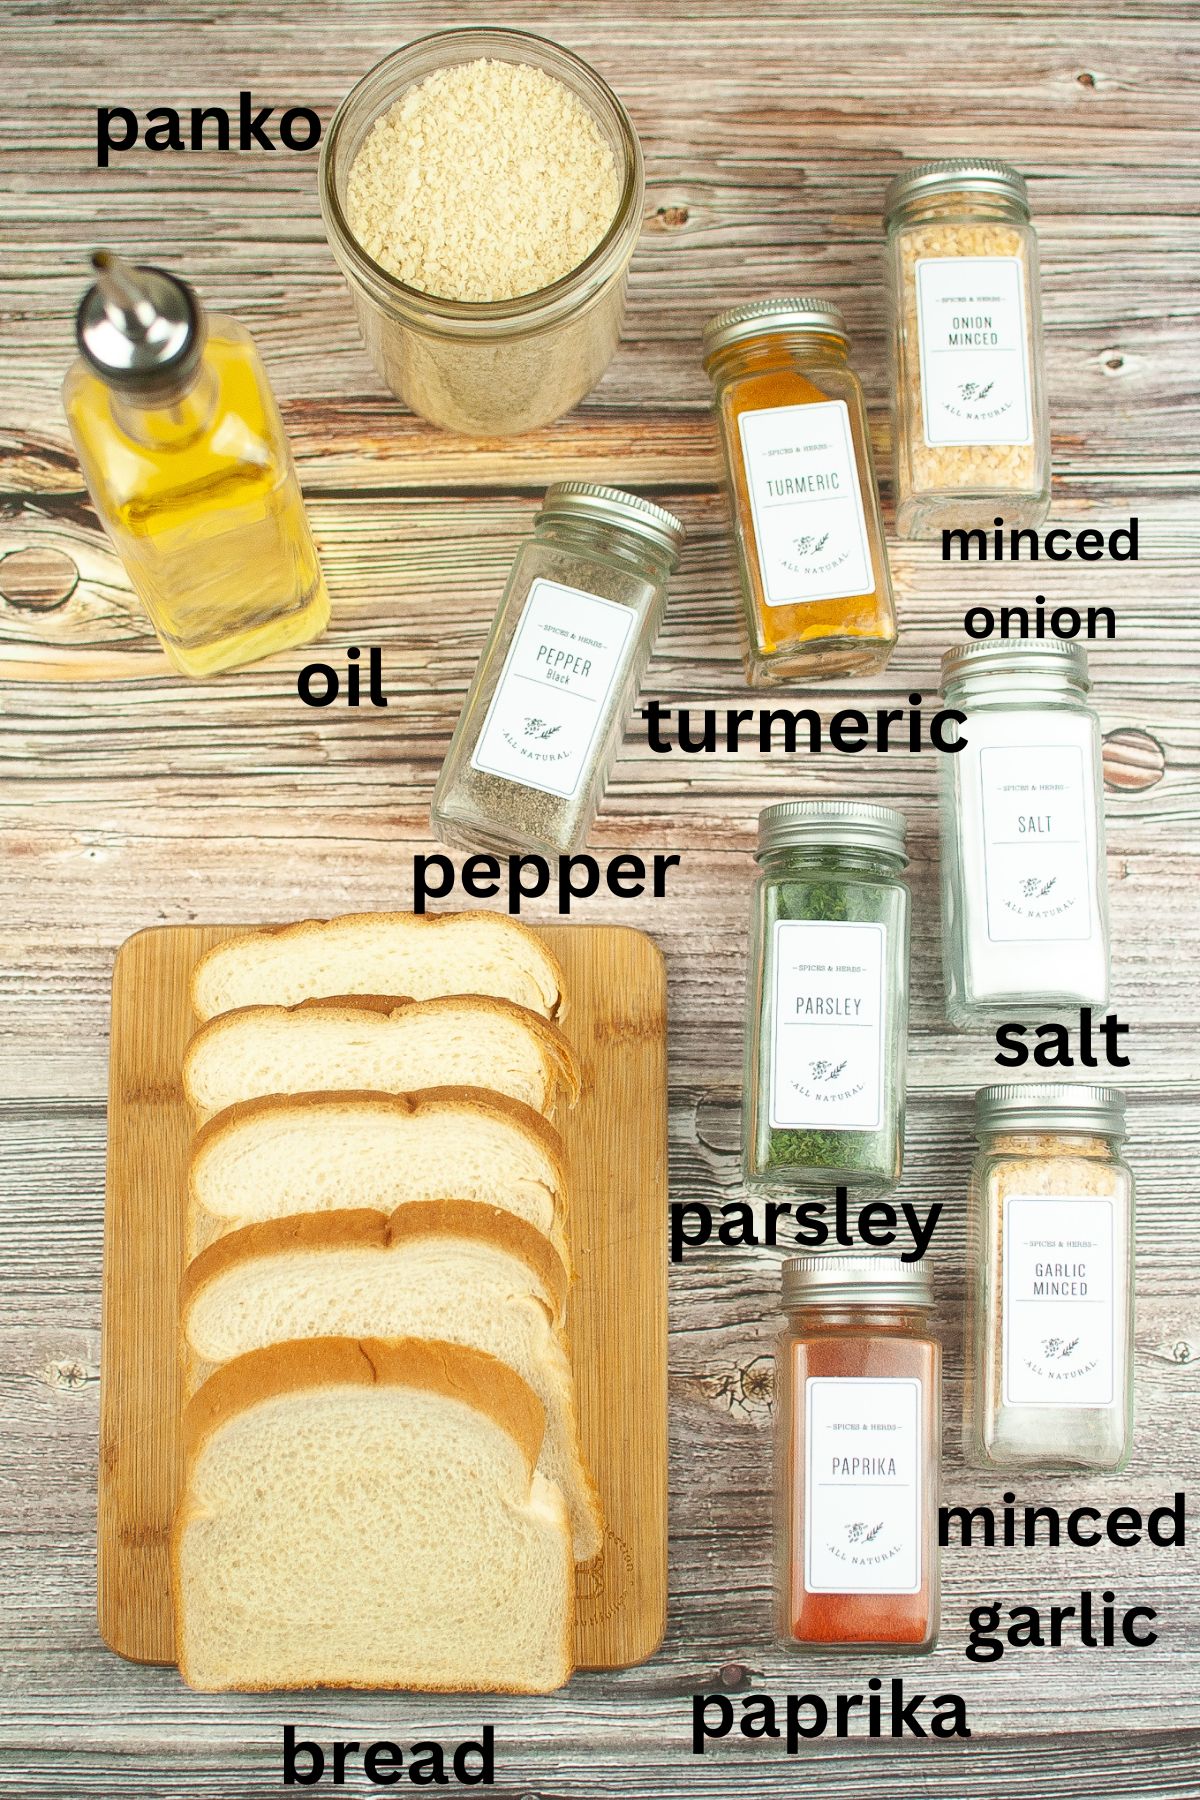 panko, oil, pepper, turmeric, minced onion, parsley, salt, paprika, minced garlic, and sliced bread on a wooden background labeled with text